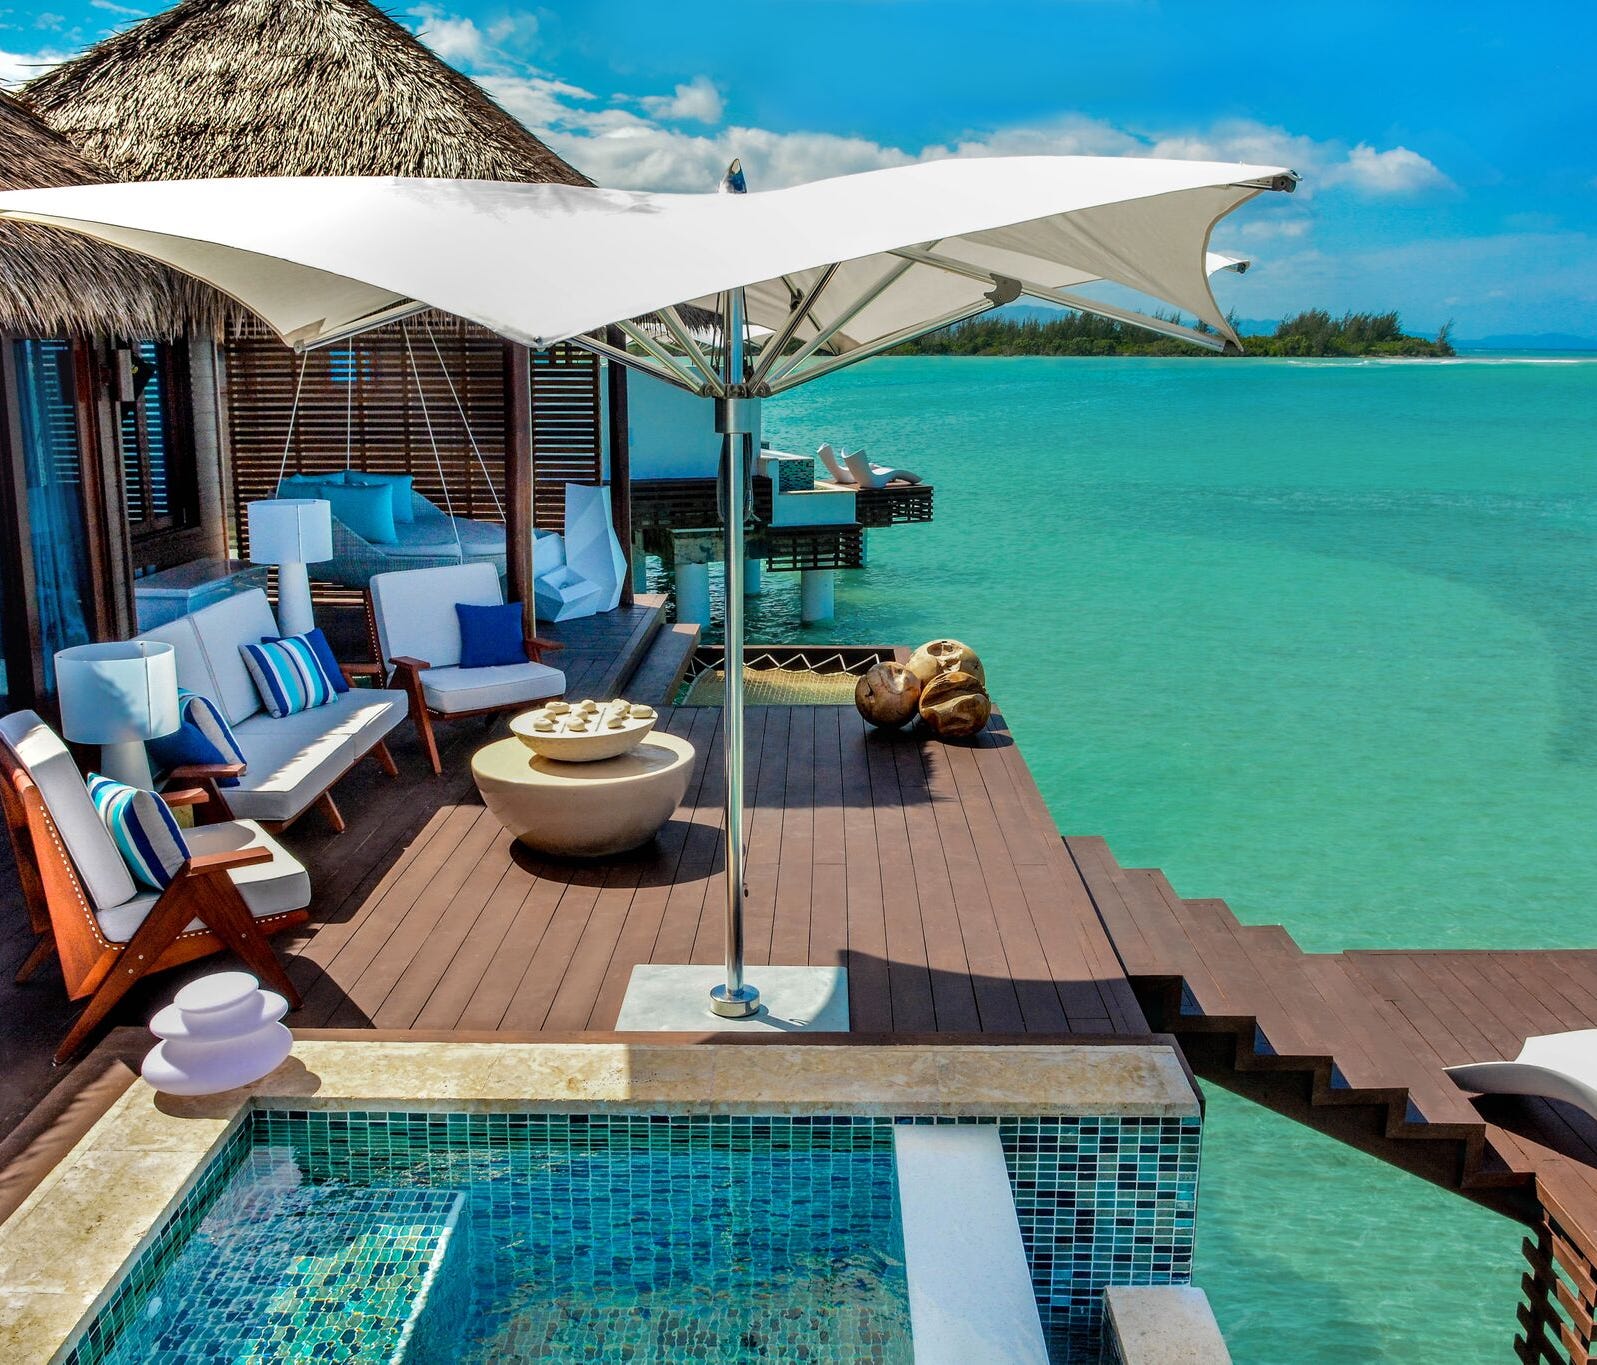 The first of their kind in the Caribbean, the overwater villas of Sandals Royal Caribbean resort in Jamaica are as close as many romantic types might come when it gets to this type of Polynesian glamour. For a starting price of $1,054 per night, they